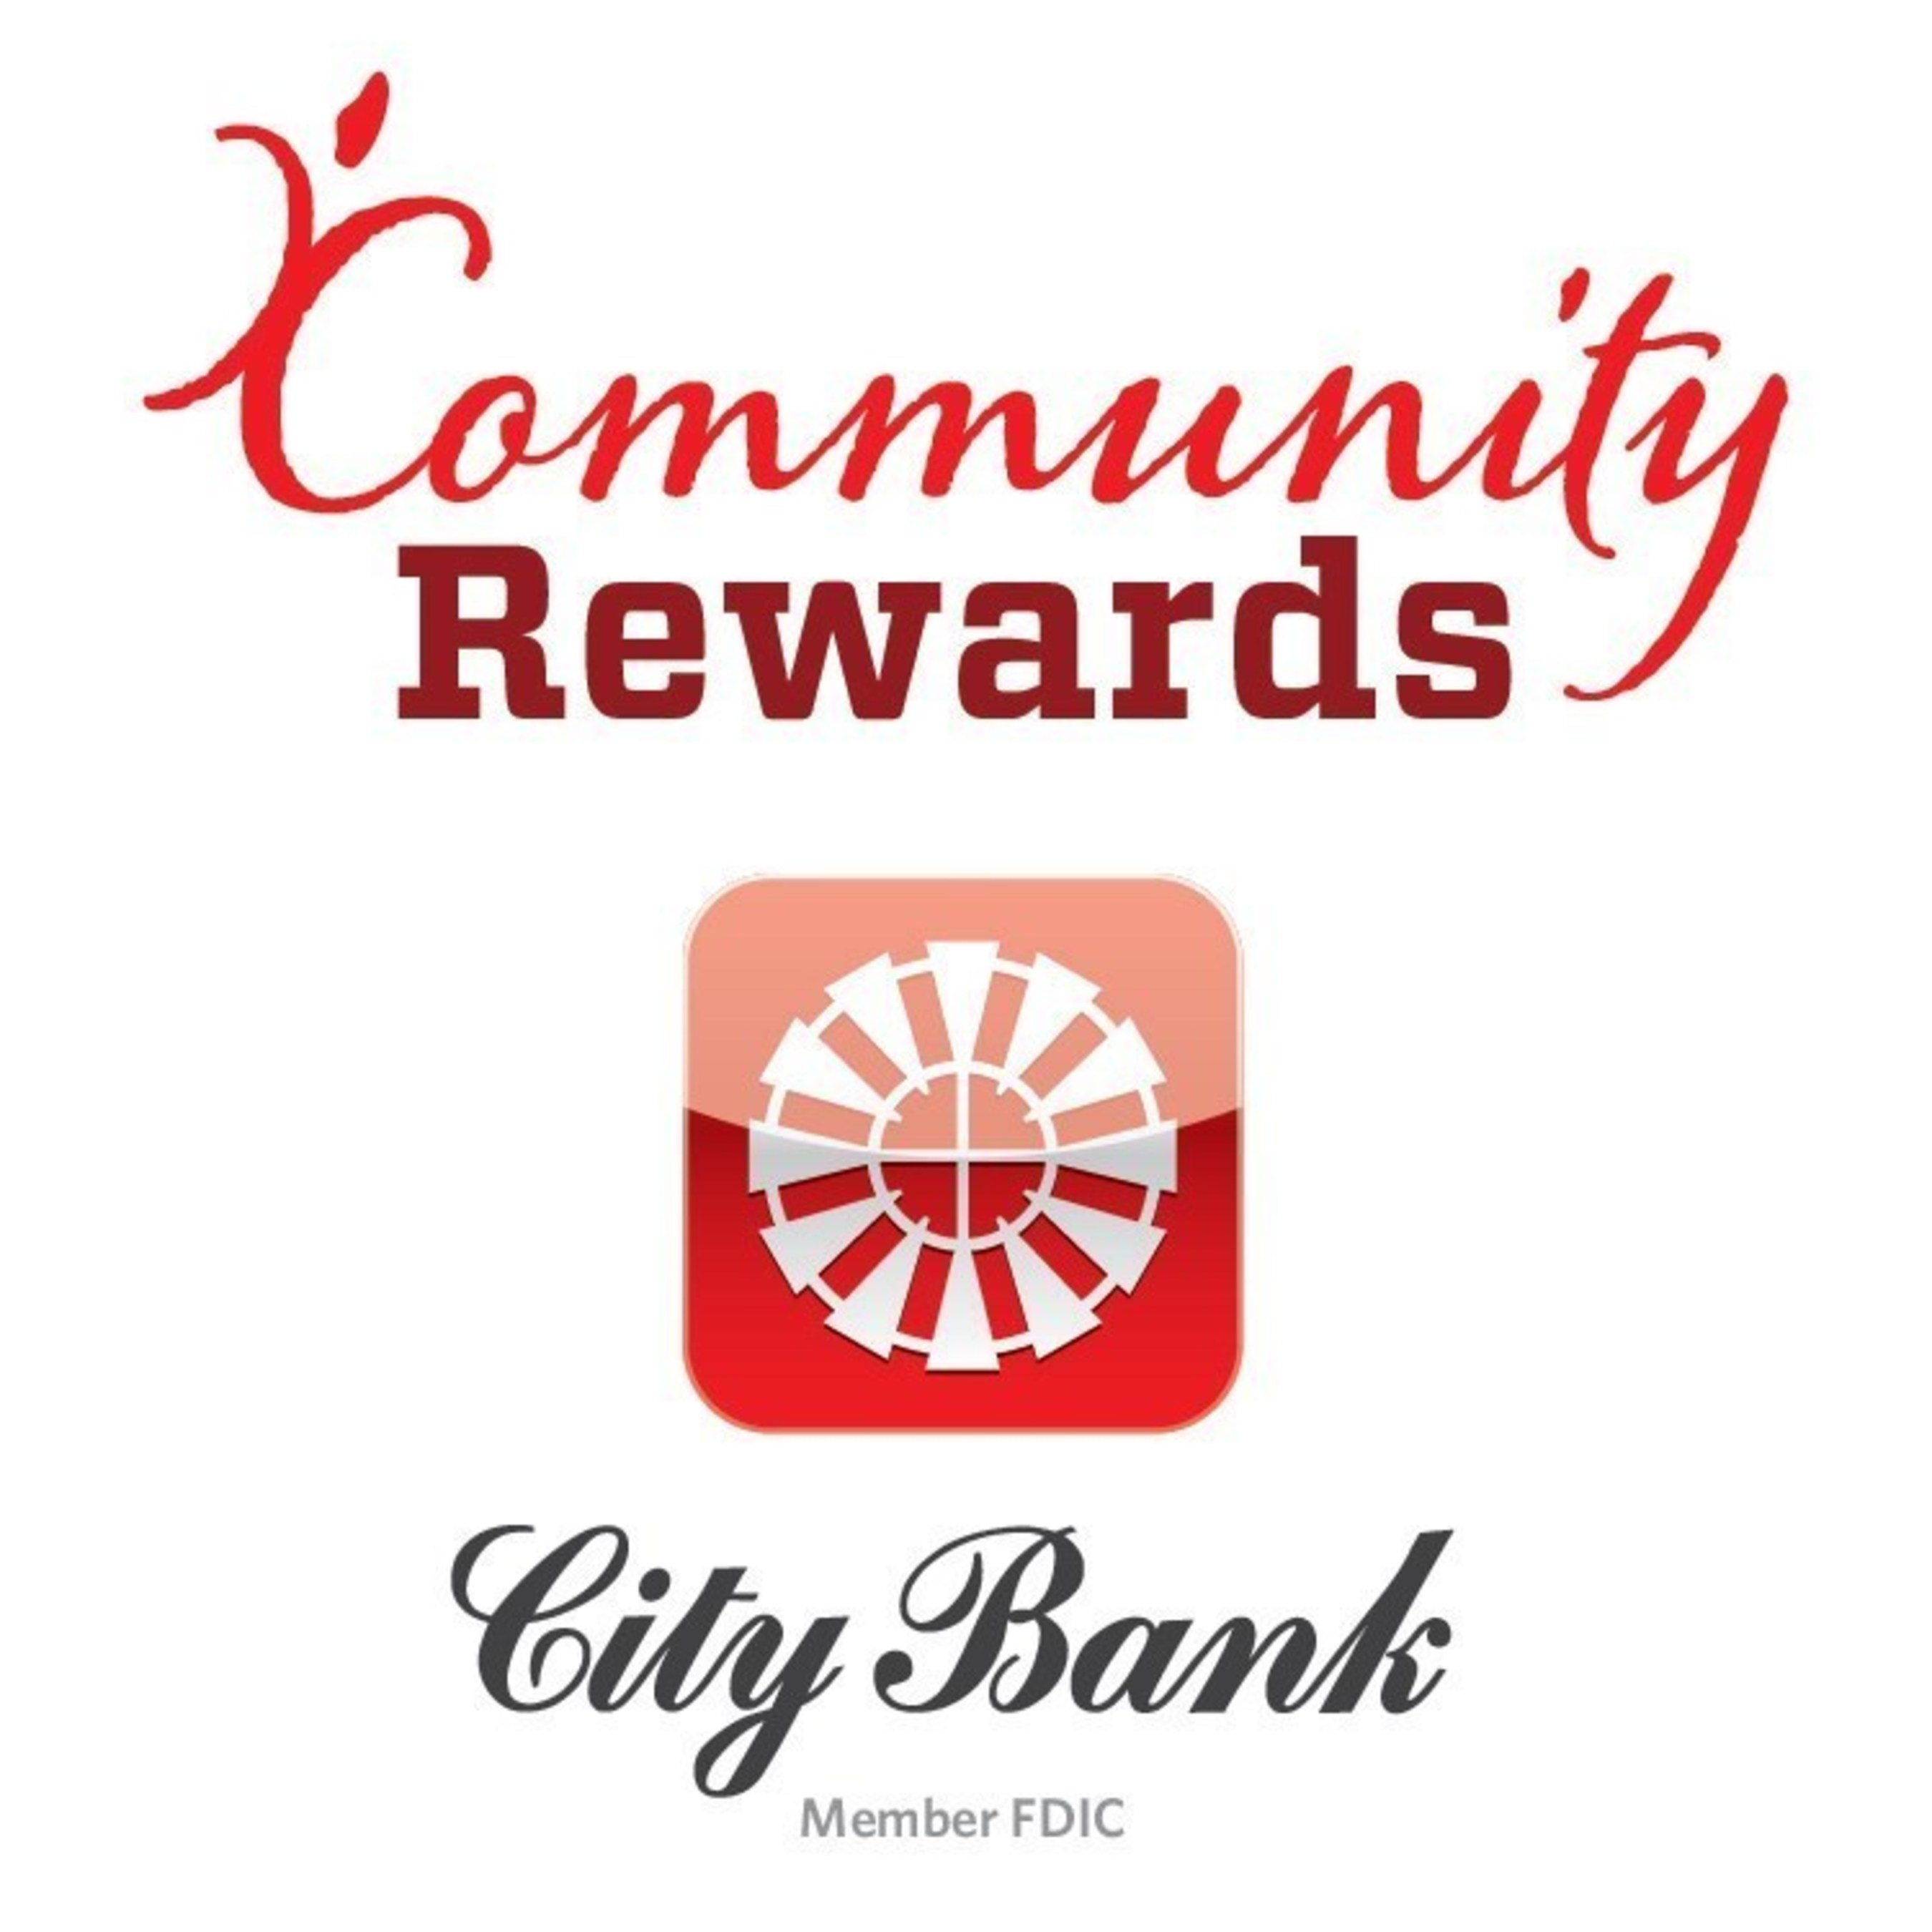 City Bank to Give Away $60,000 to Nonprofits